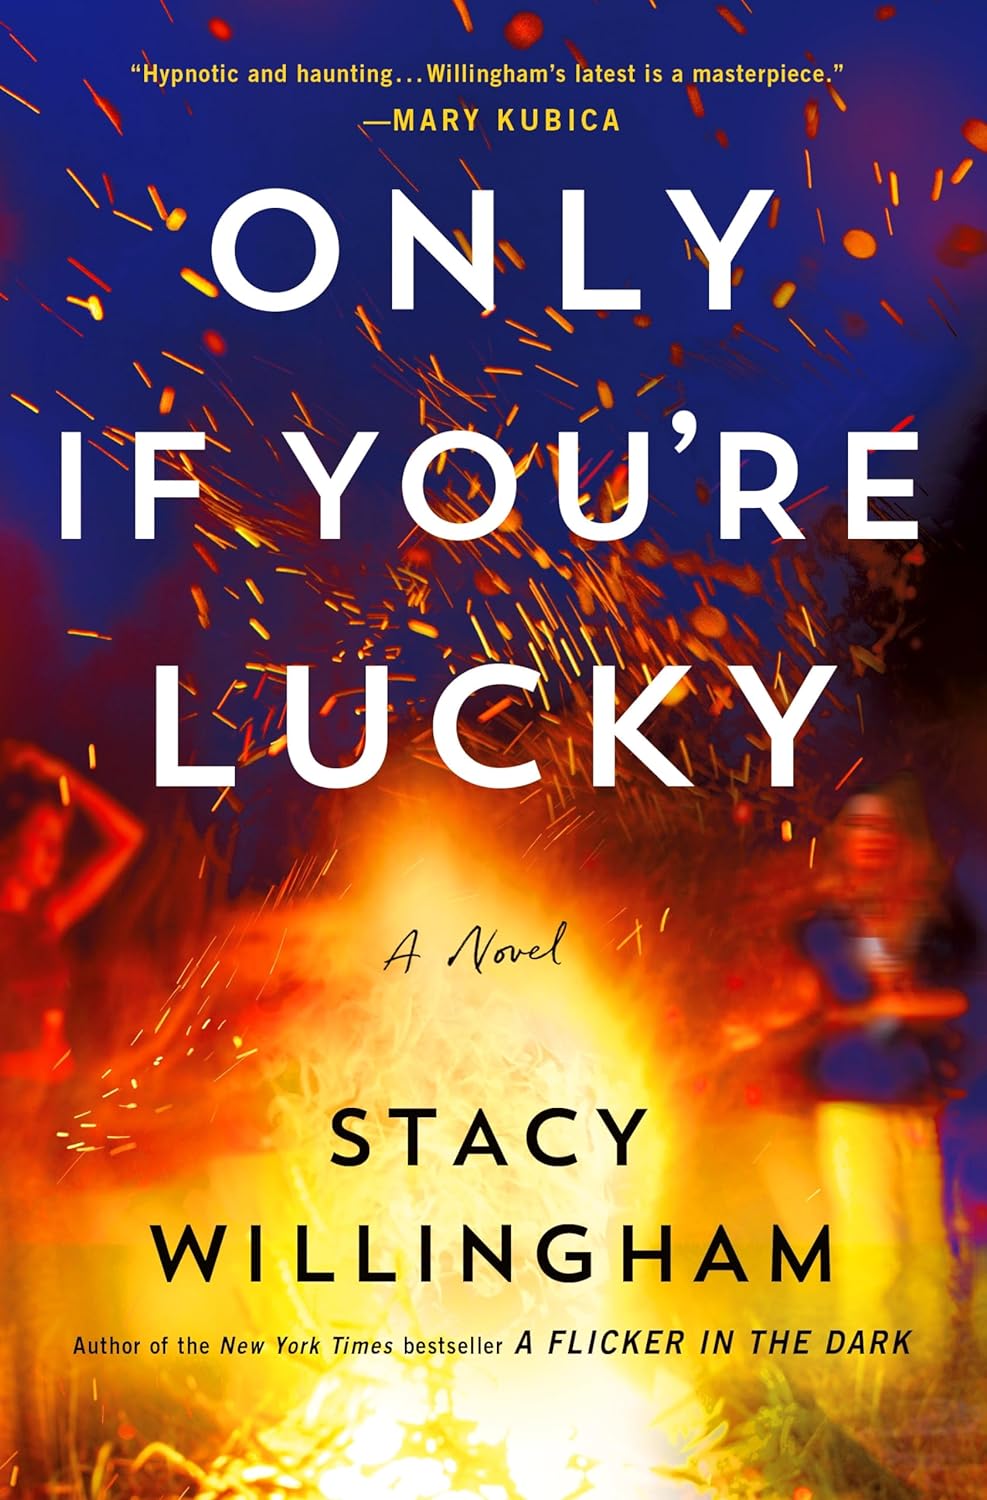 Only If You’re Lucky by Stacy Willingham